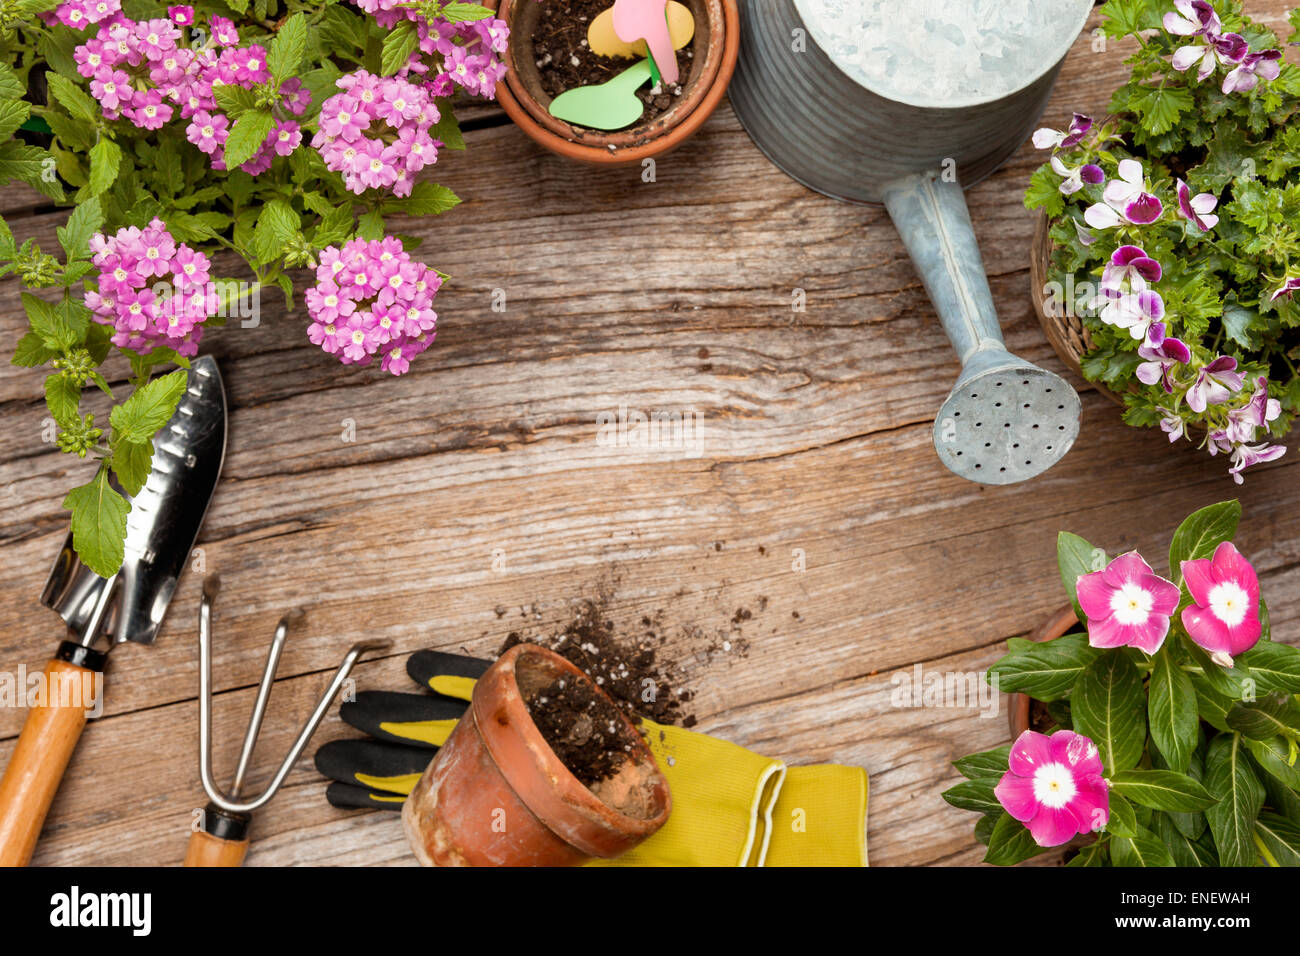 Gardening tools and flower on wooden background Stock Photo